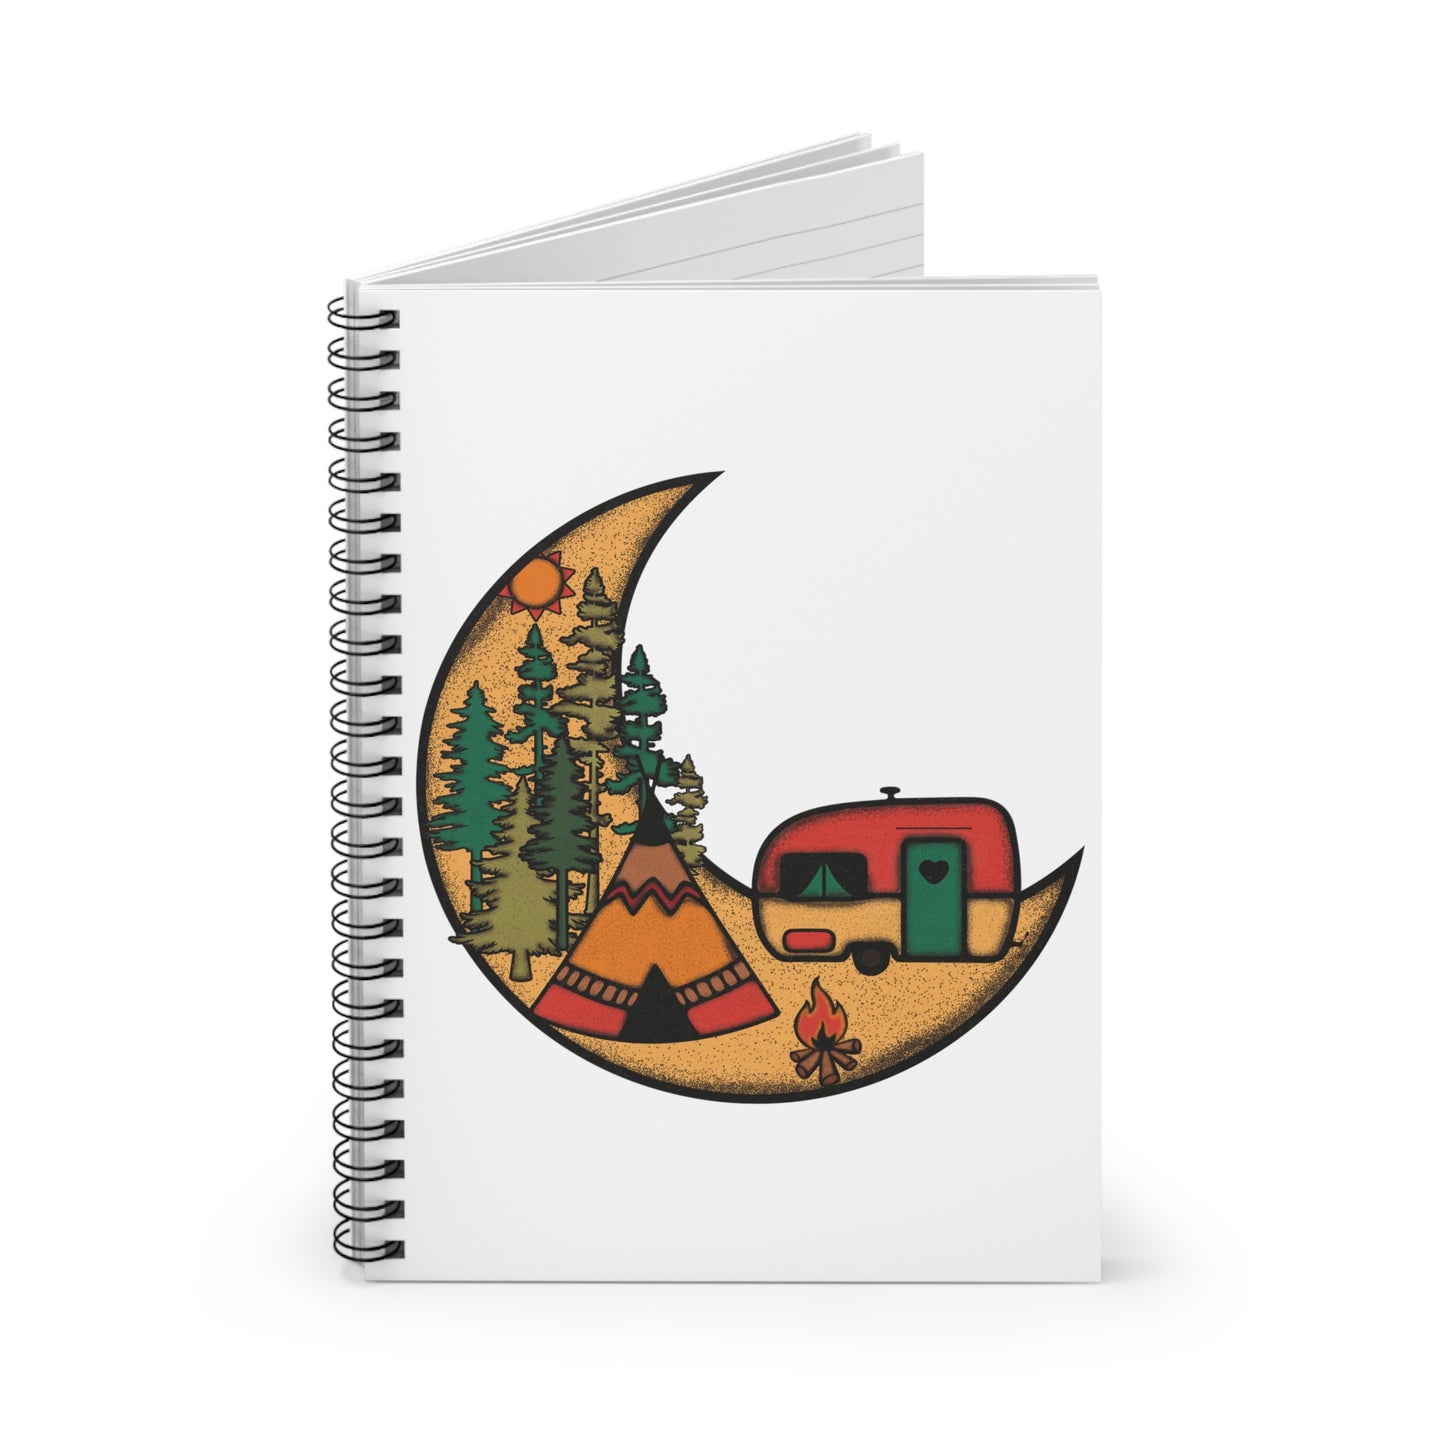 Camper's Moon: Spiral Notebook - Log Books - Journals - Diaries - and More Custom Printed by TheGlassyLass